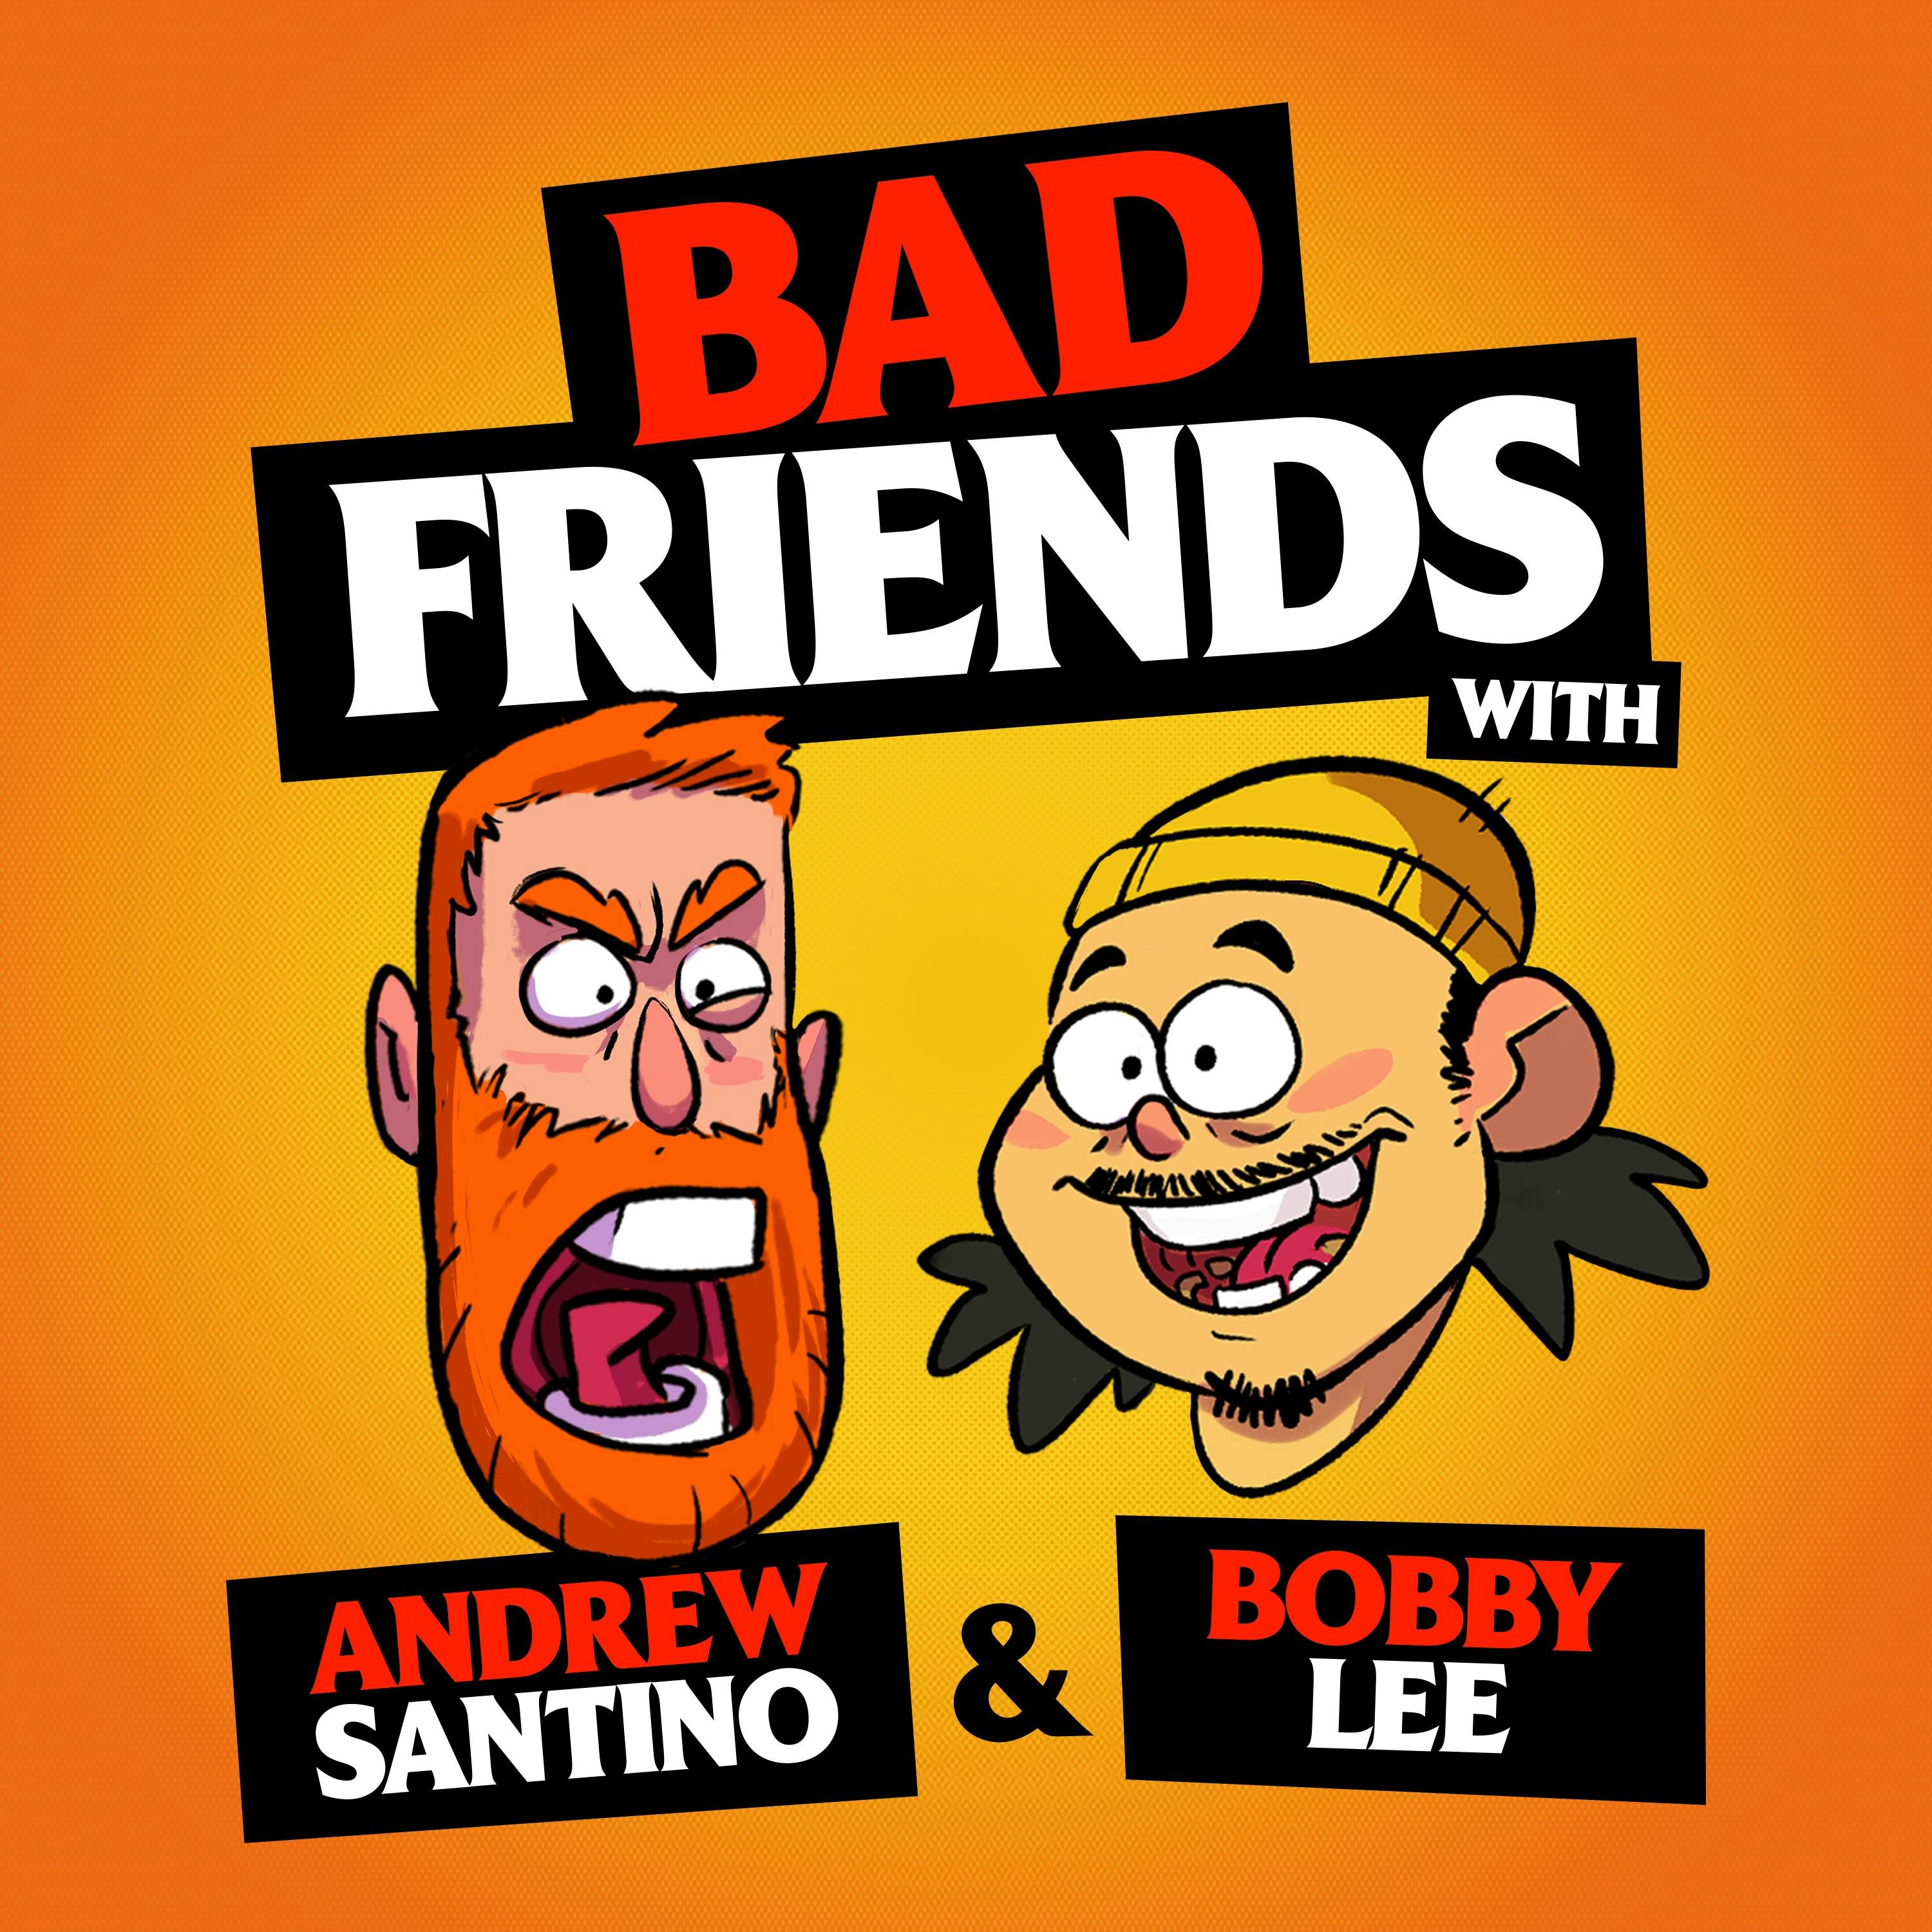 You Are Always With You by Andrew Santino and Bobby Lee